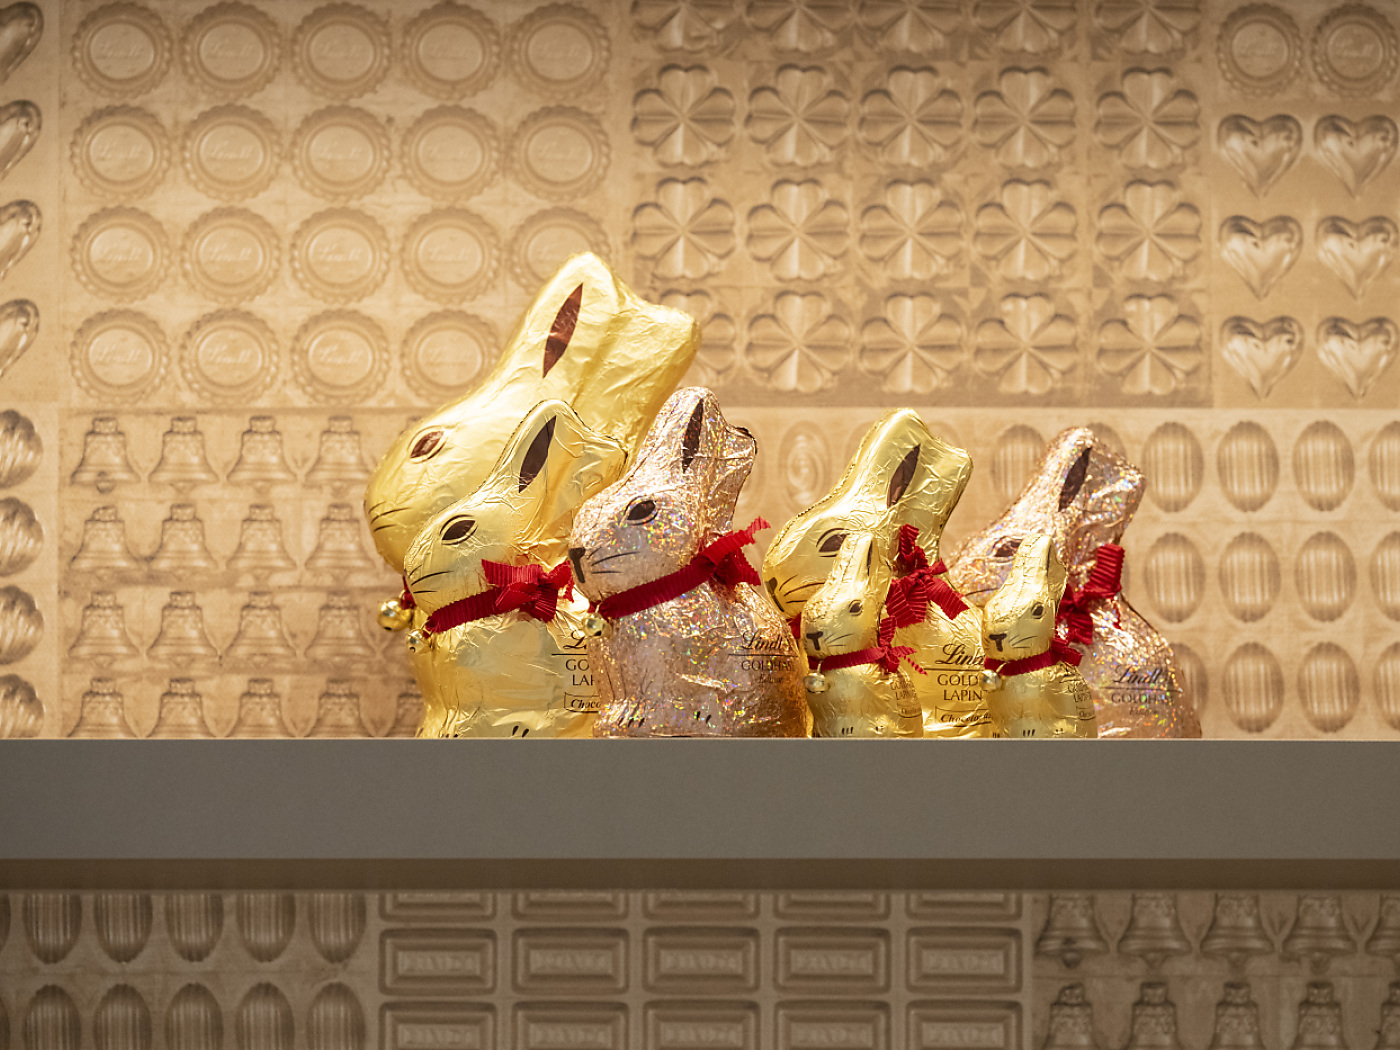 Lindt & Sprüngli earns more in the first half-year